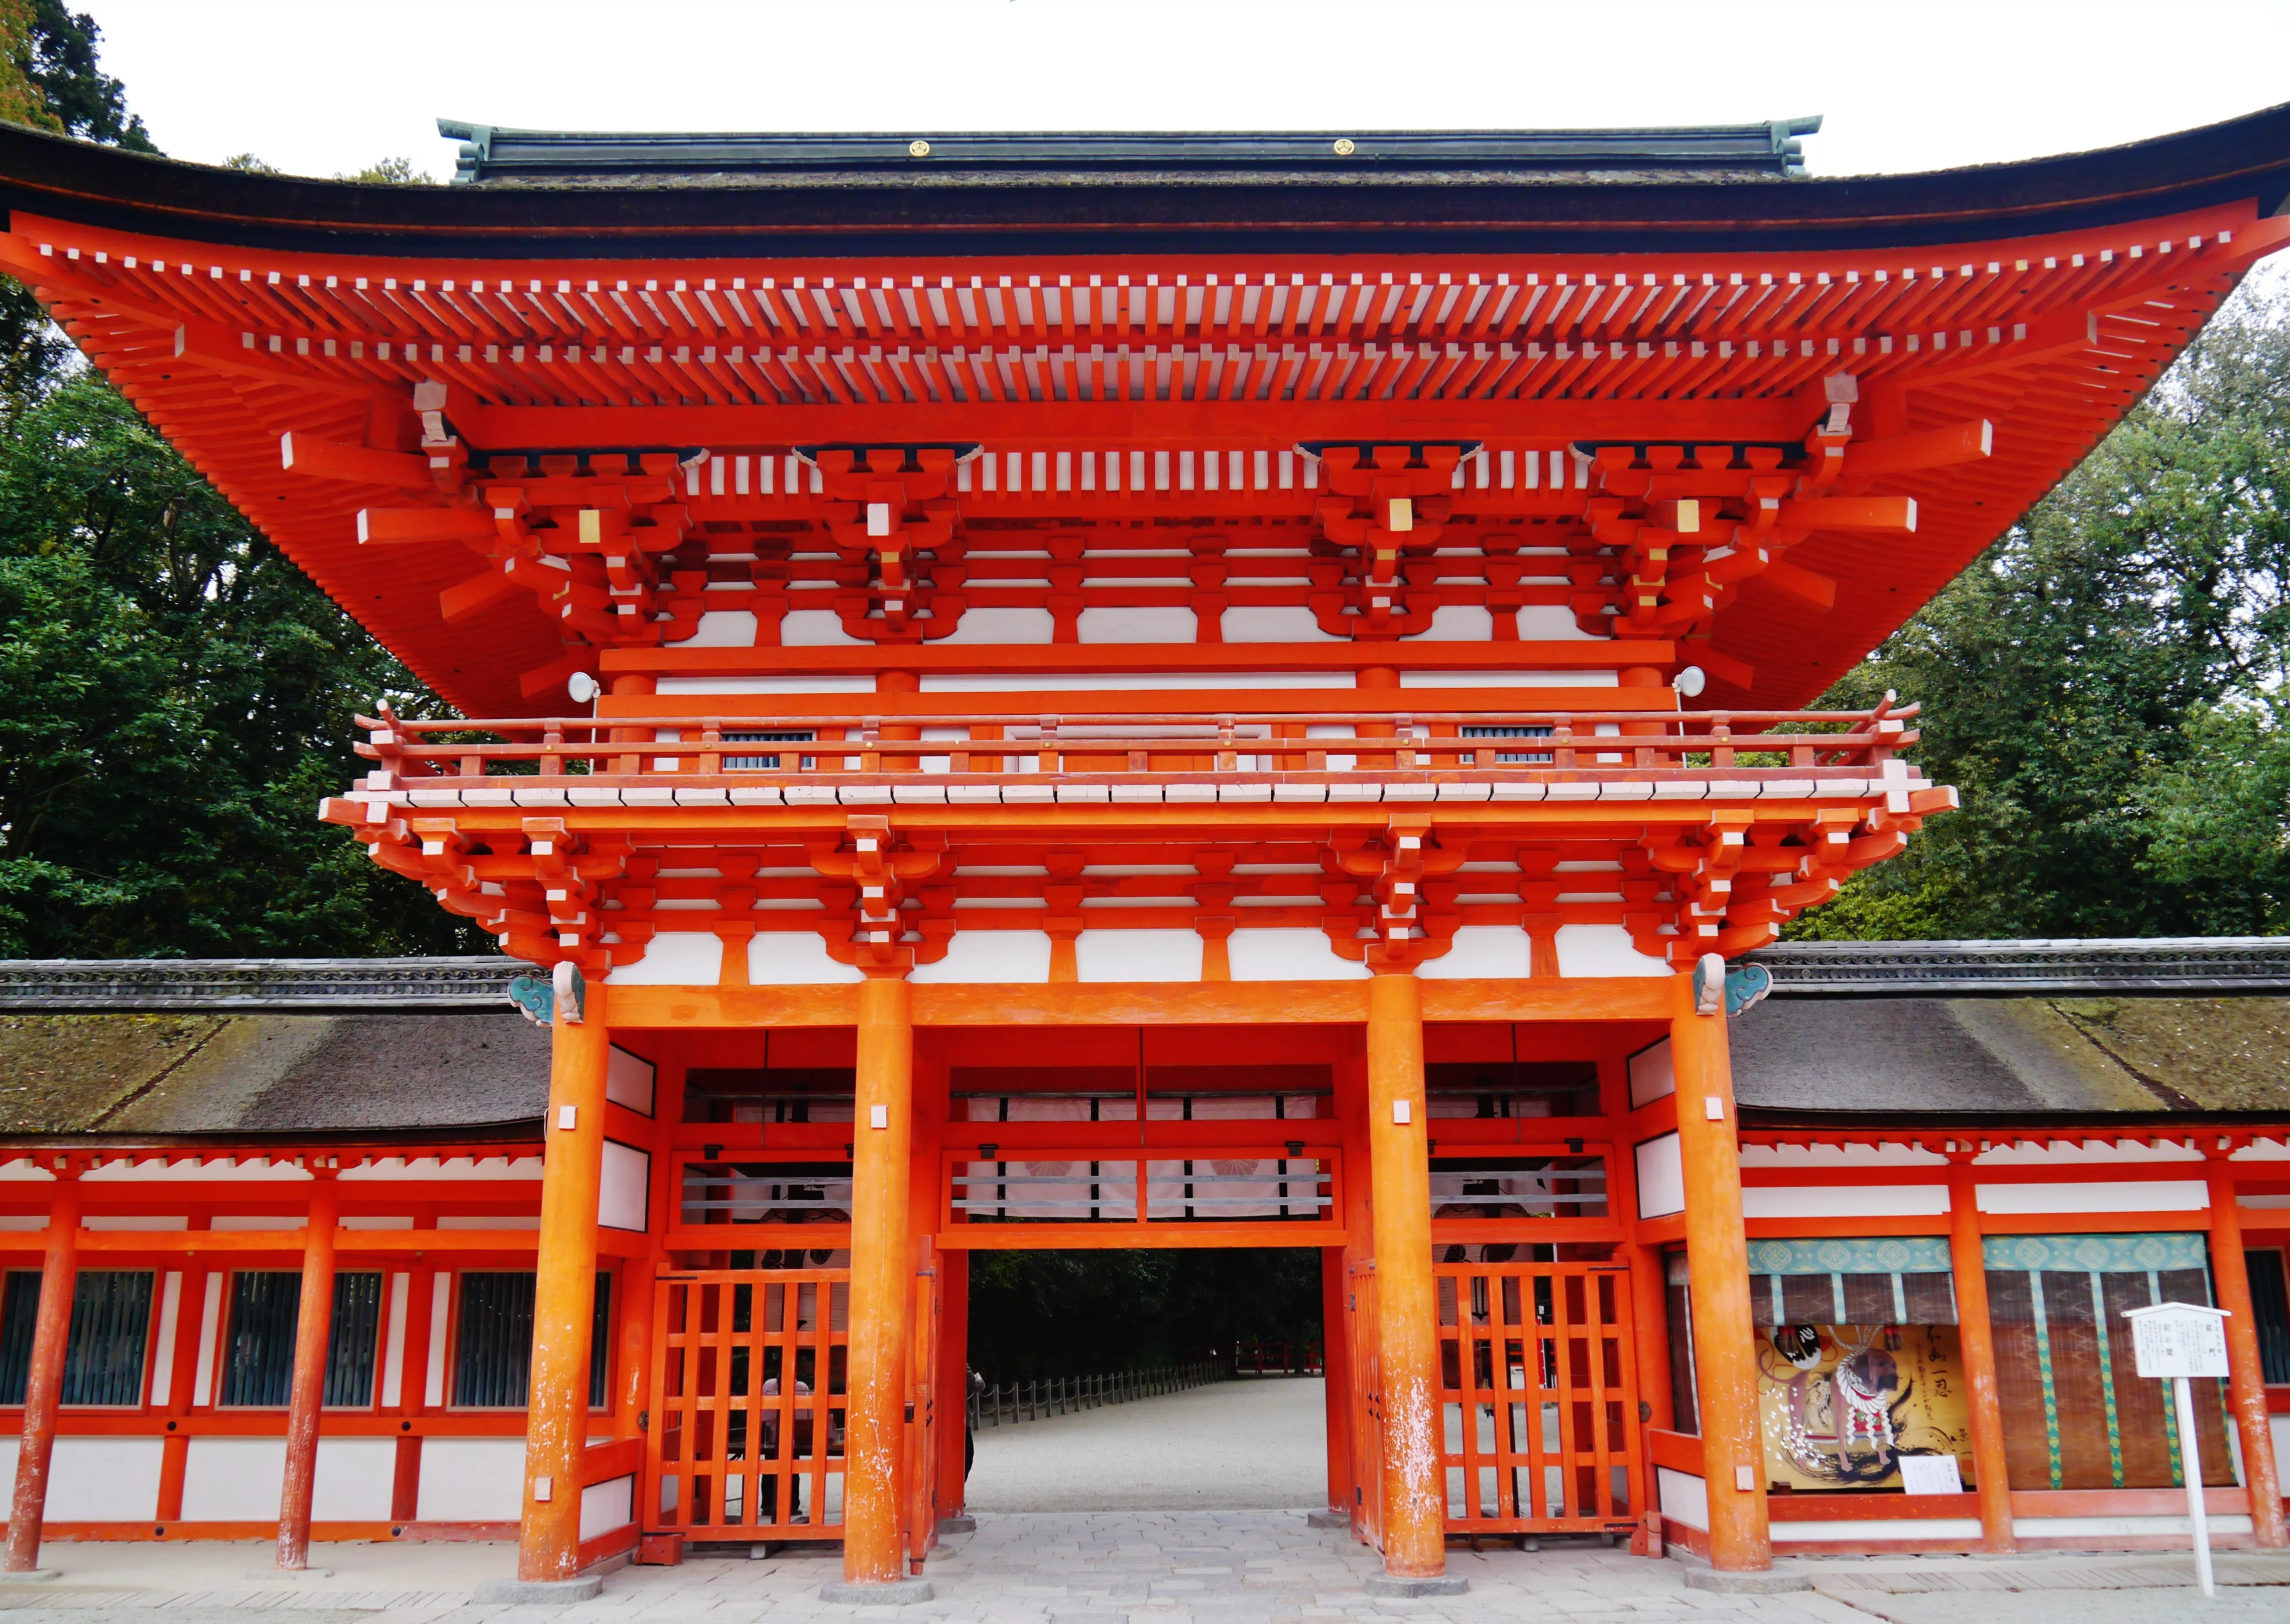 Shimogamo-Jinja in Japan, East Asia | Architecture - Rated 3.7